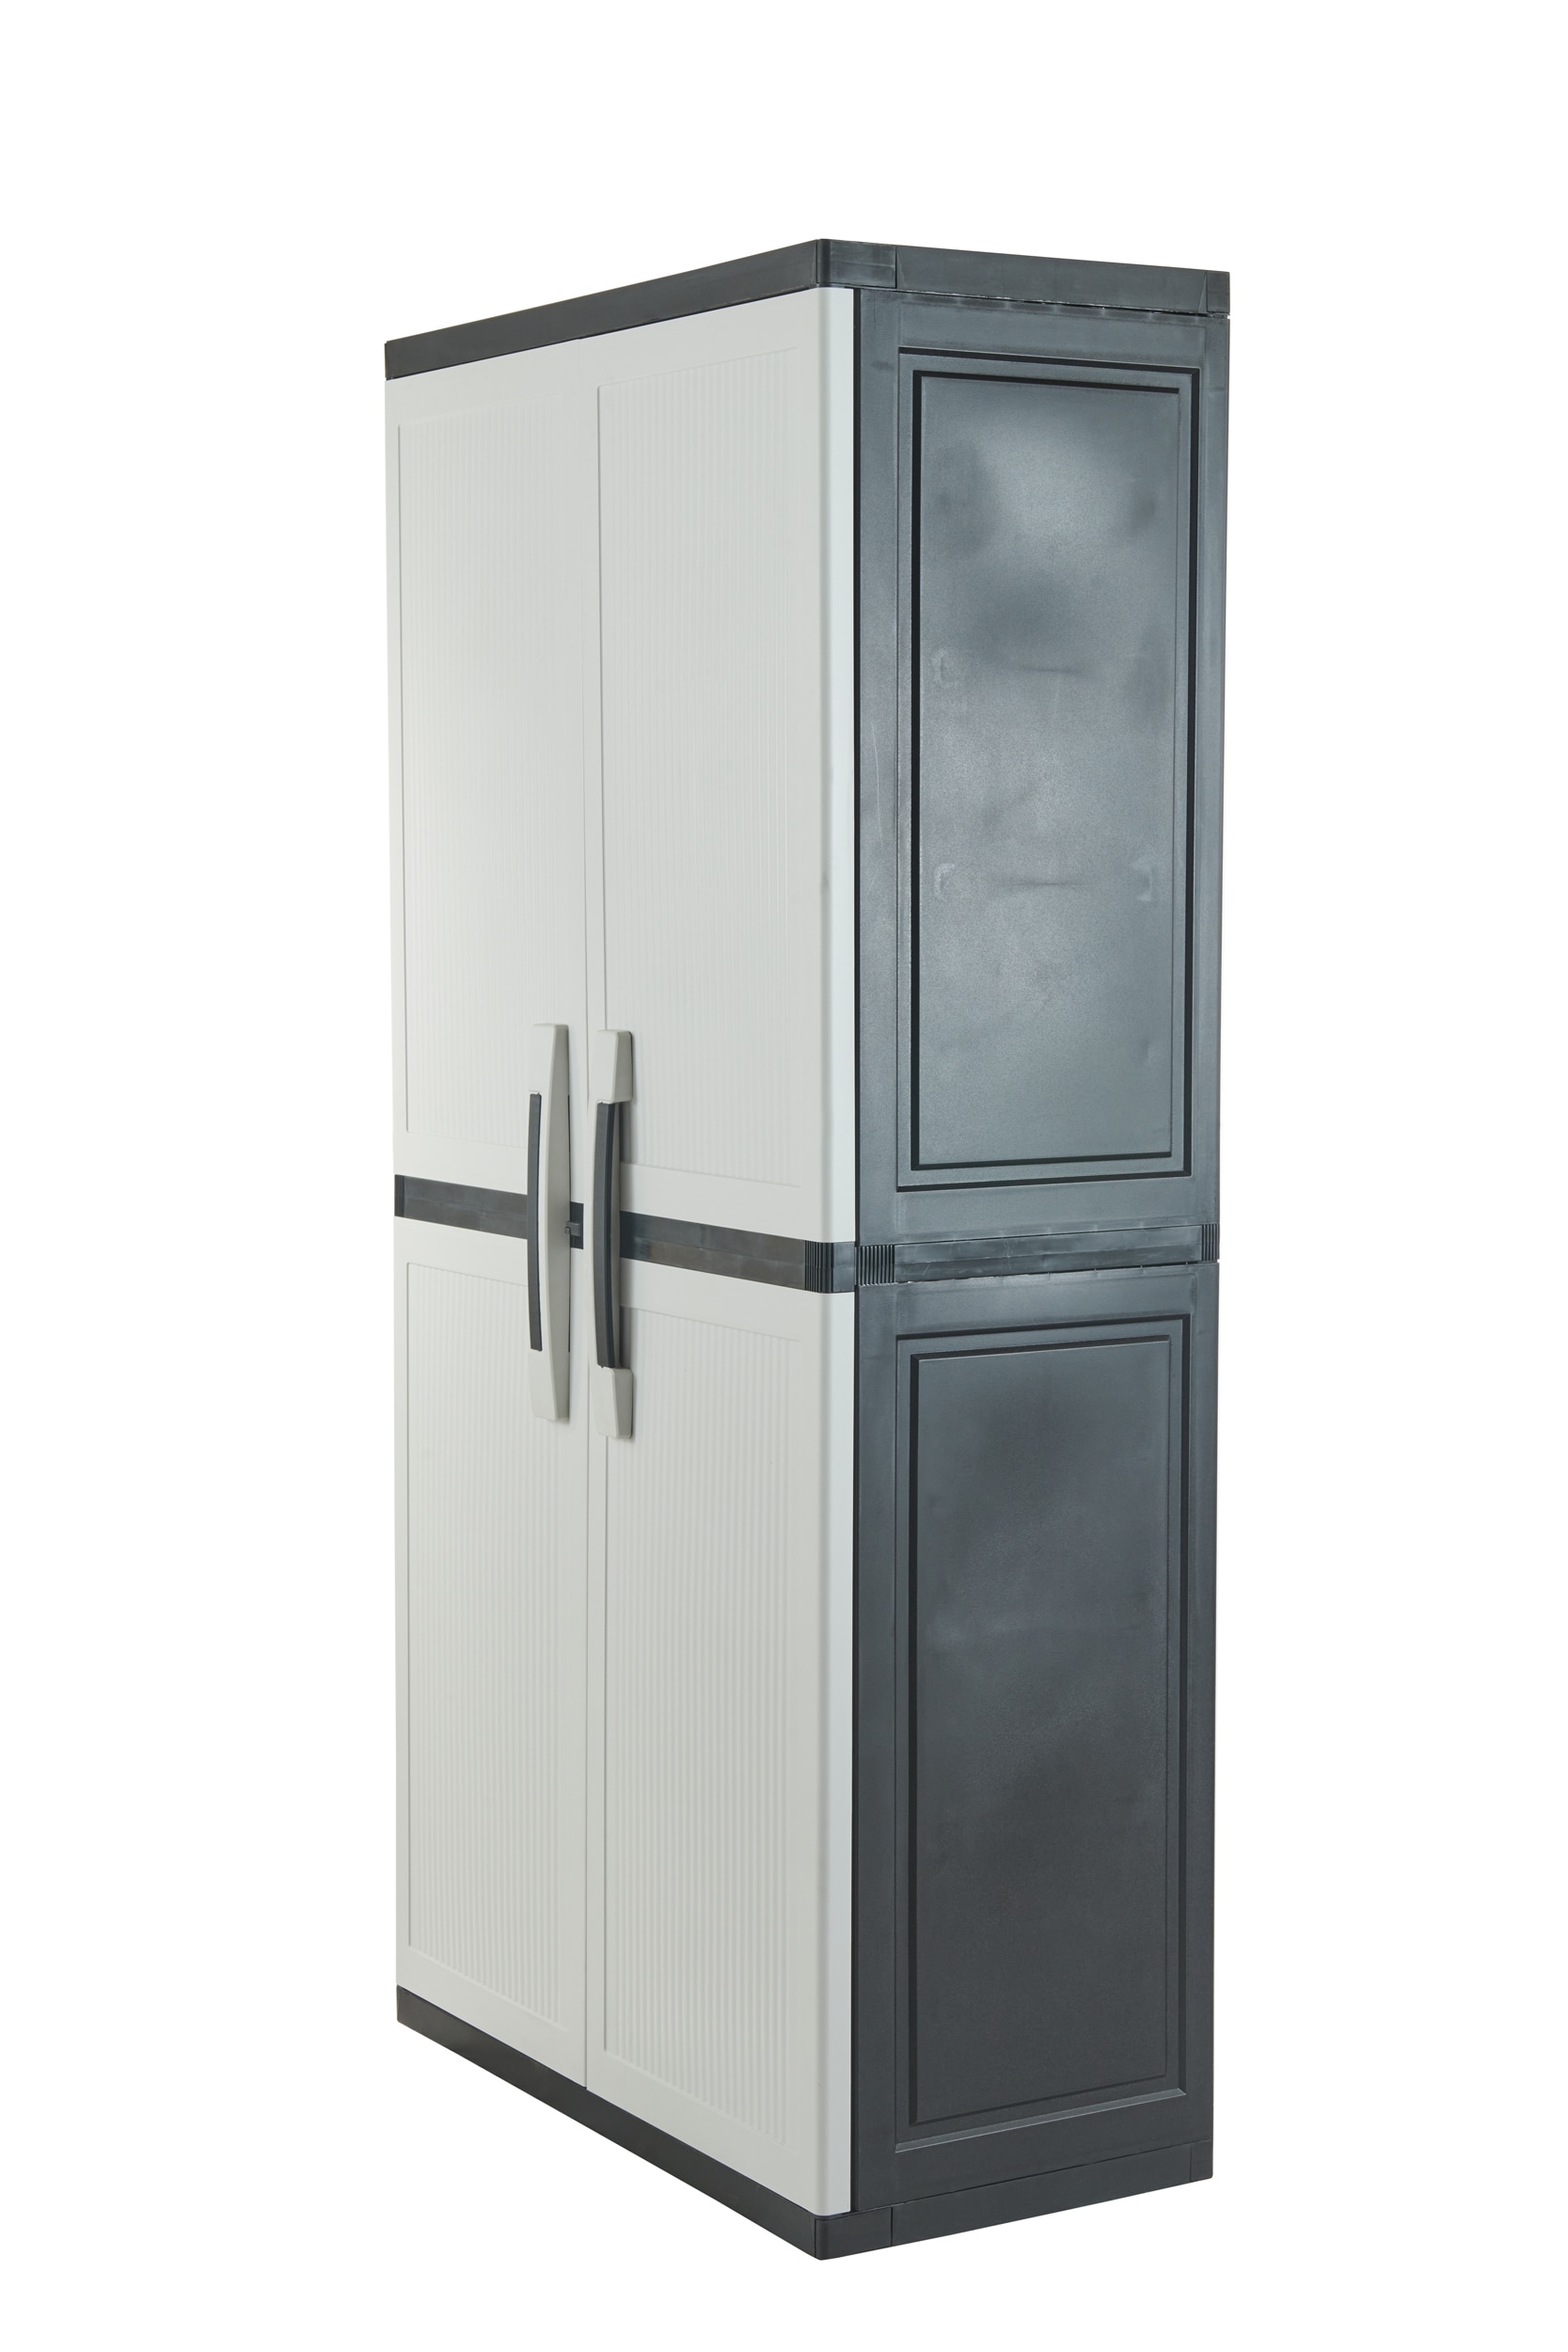  Keter Storage Cabinet with Doors and Shelves for Tool